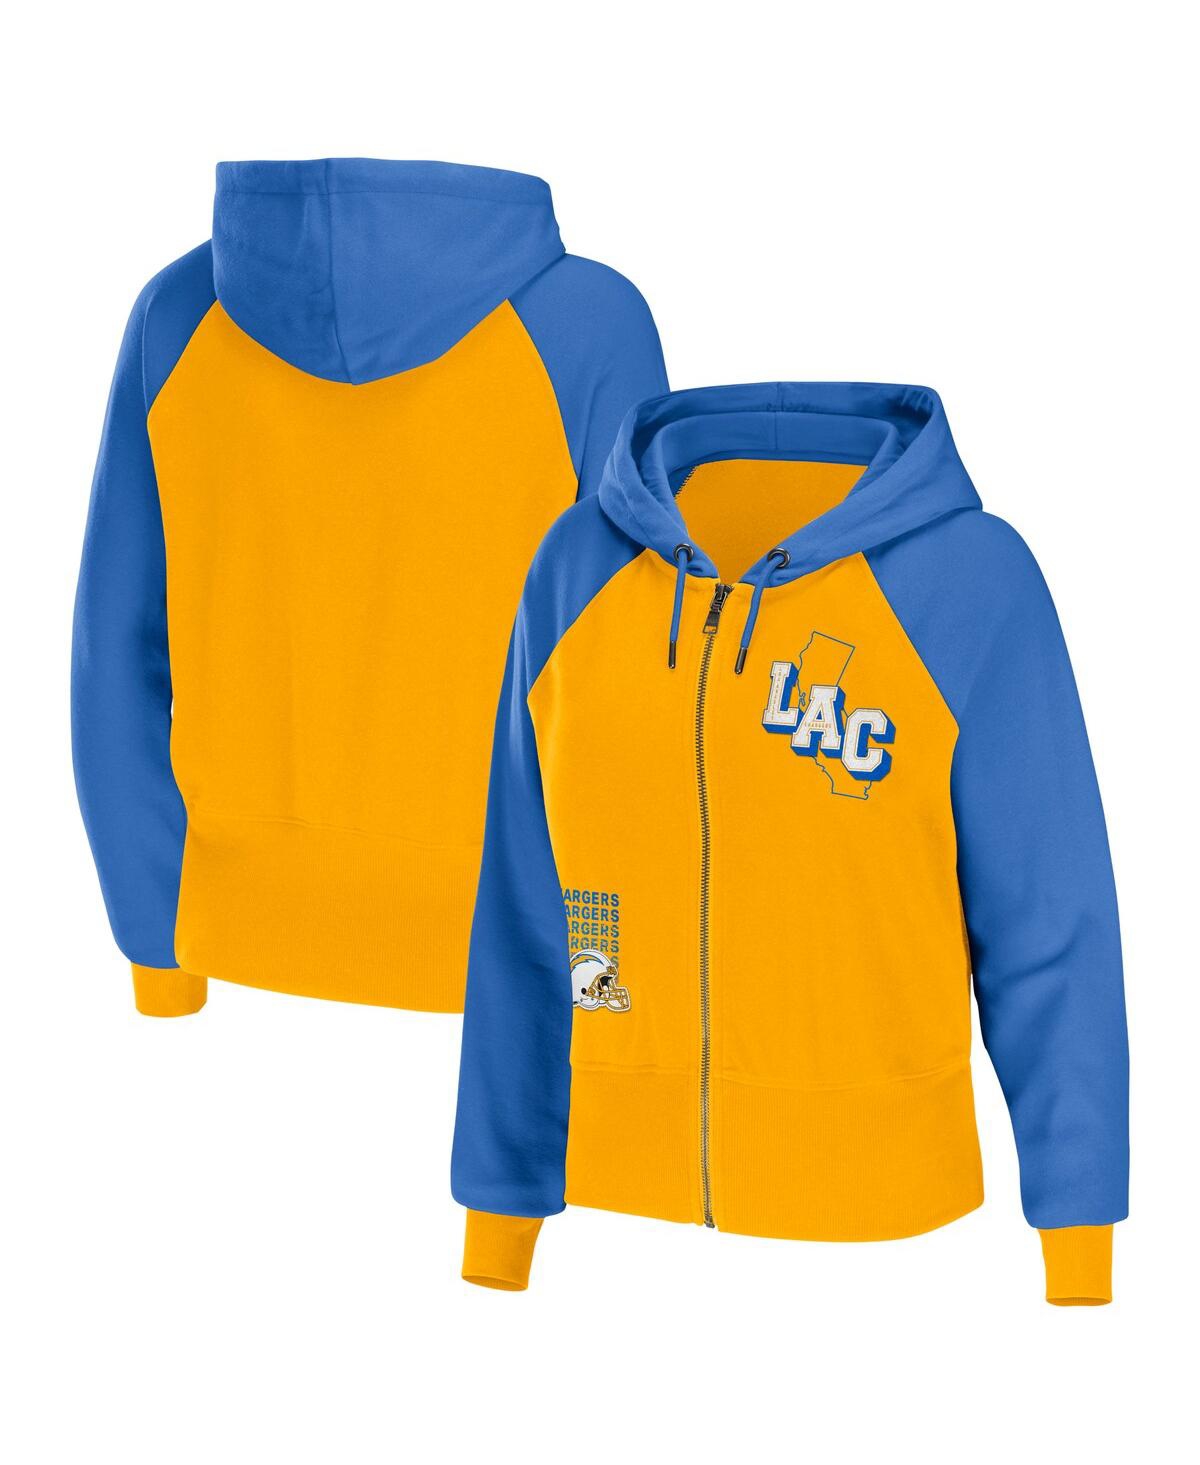 Shop Wear By Erin Andrews Women's  Gold Los Angeles Chargers Colorblock Full-zip Hoodie